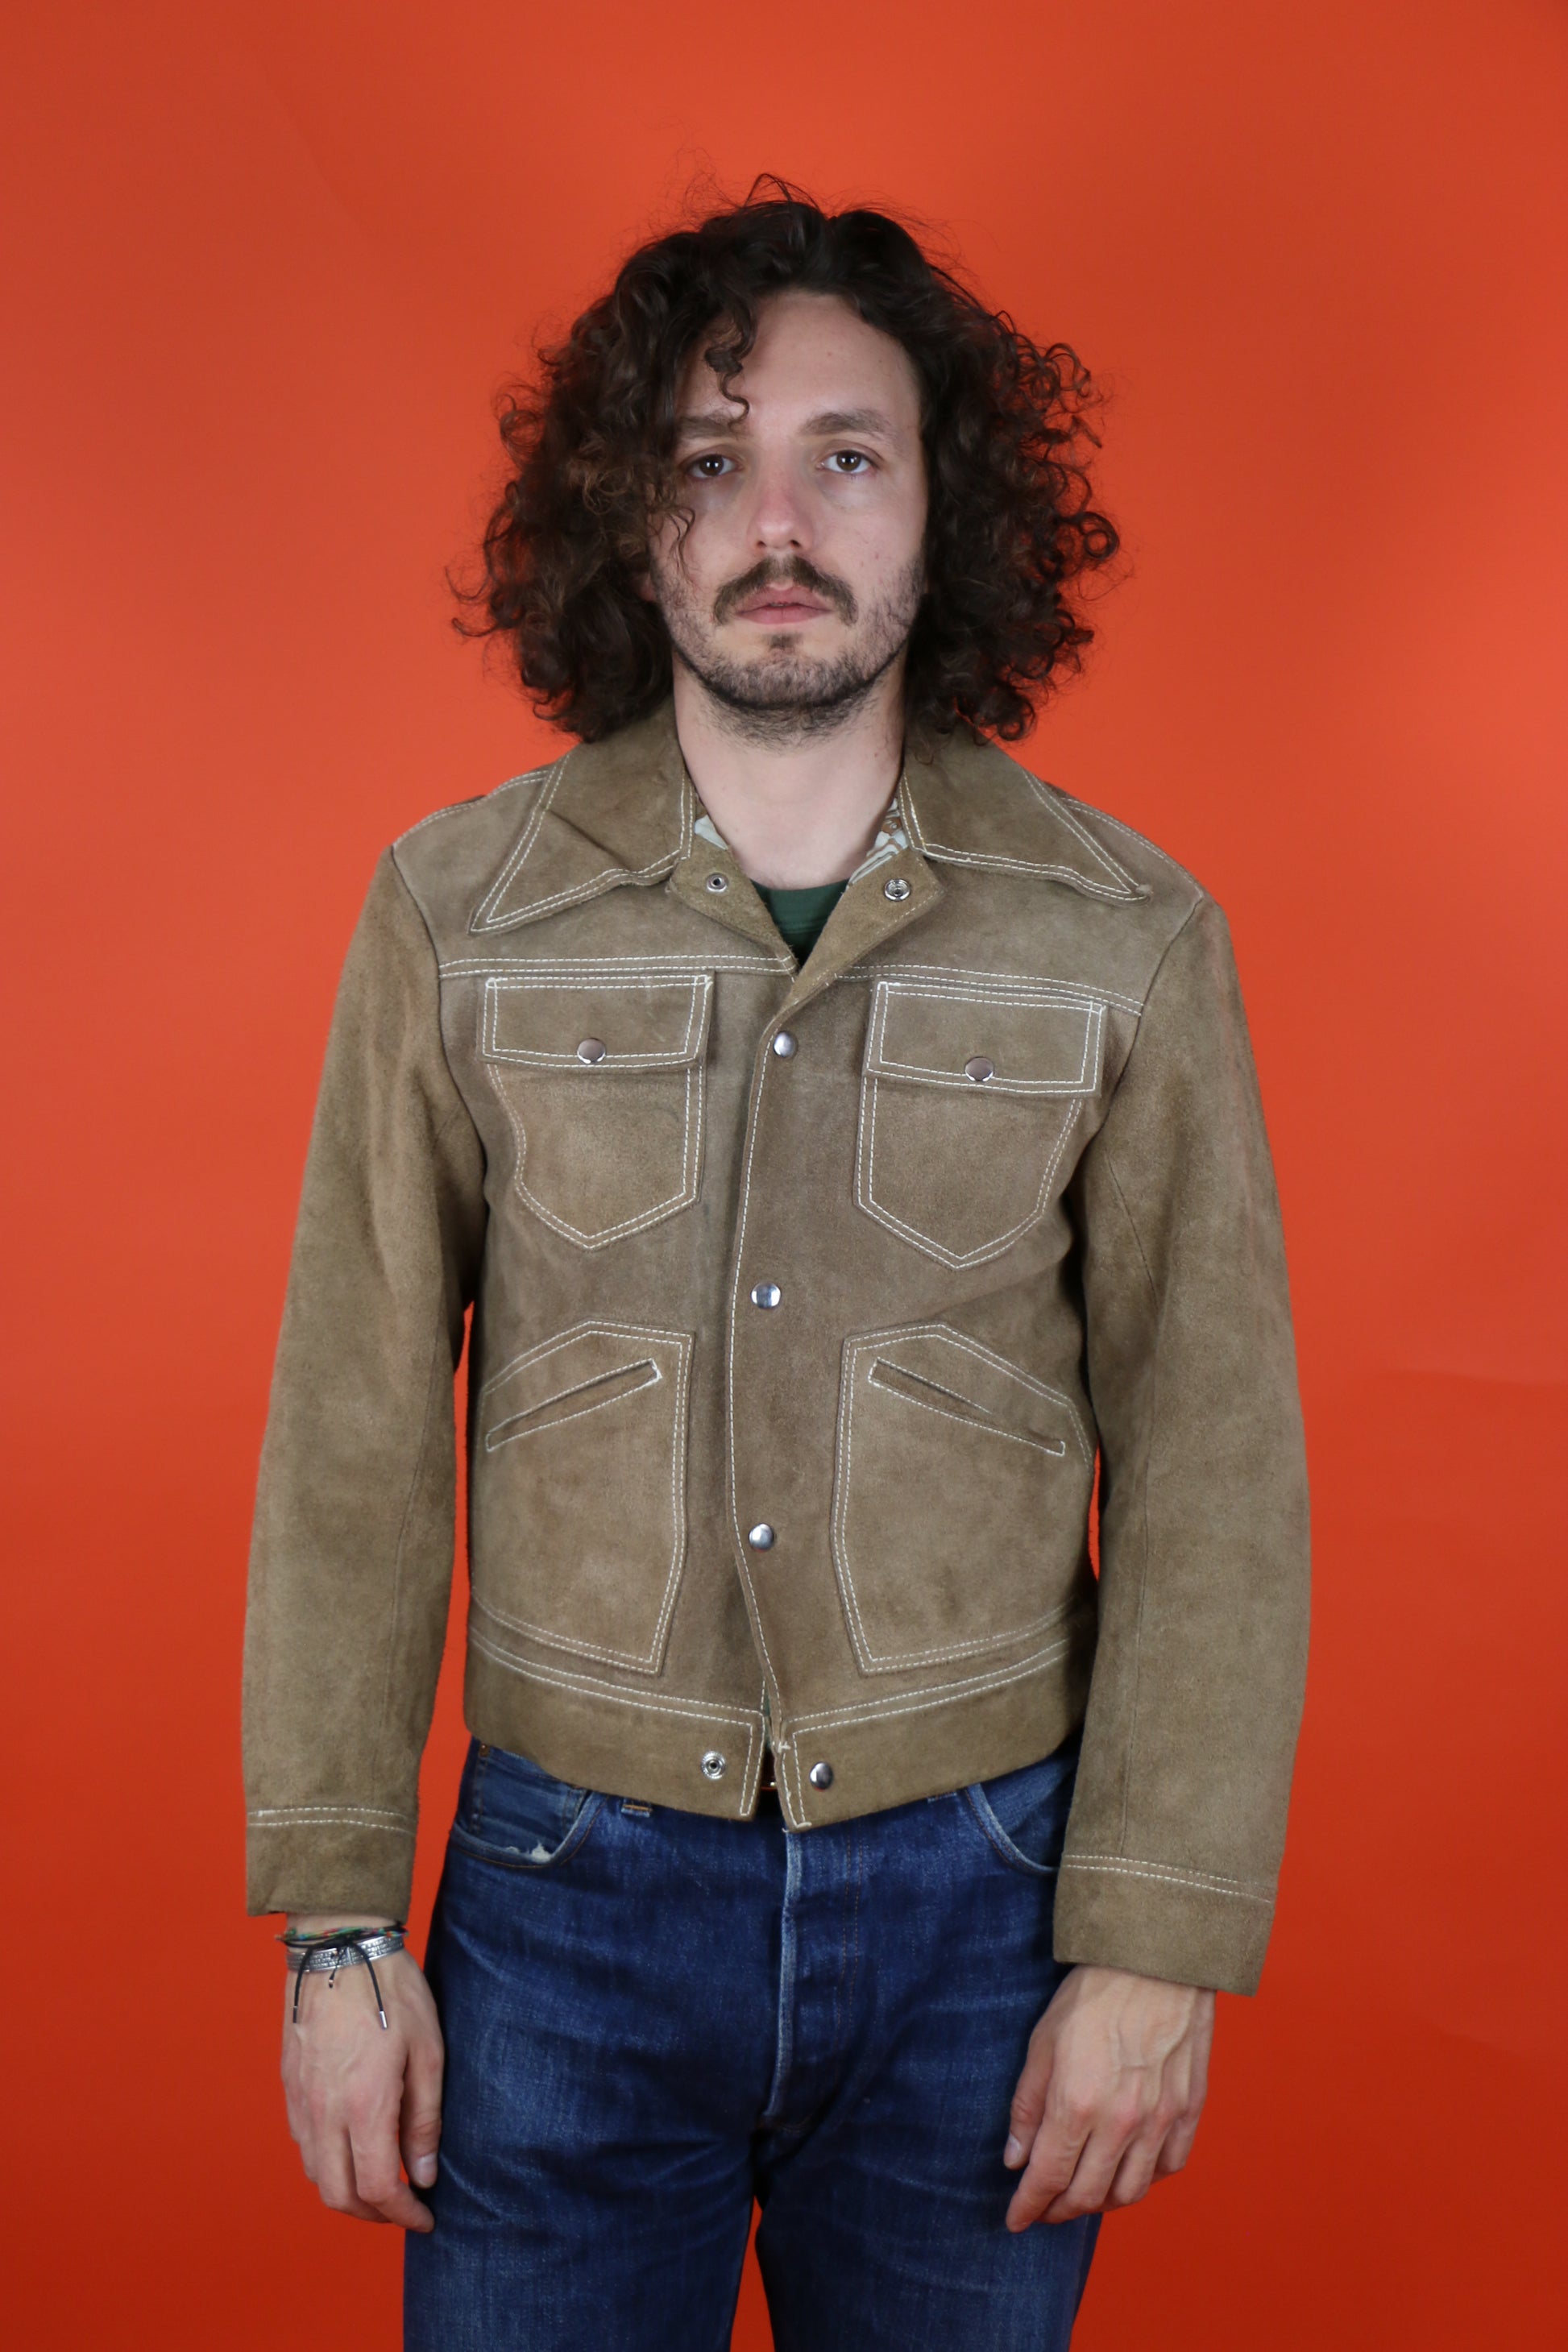 Mexican Leather Jacket 70s - vintage clothing clochard92.com